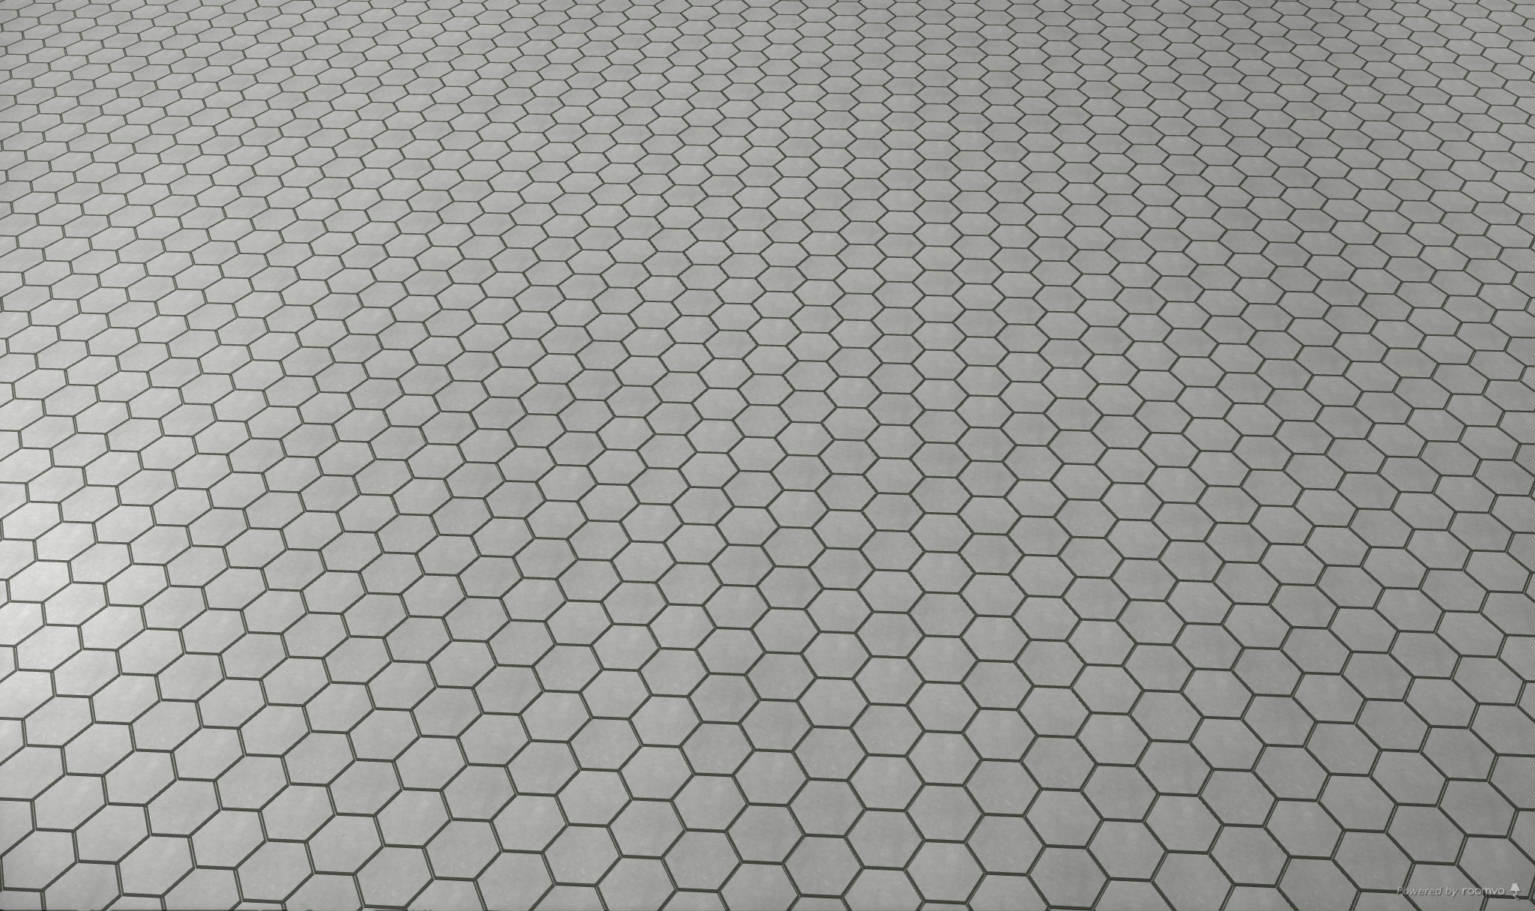 Ashland Grey Hexagon 3X3" Mosaic | Qualis Ceramica | Luxury Tile and Vinyl at affordable prices